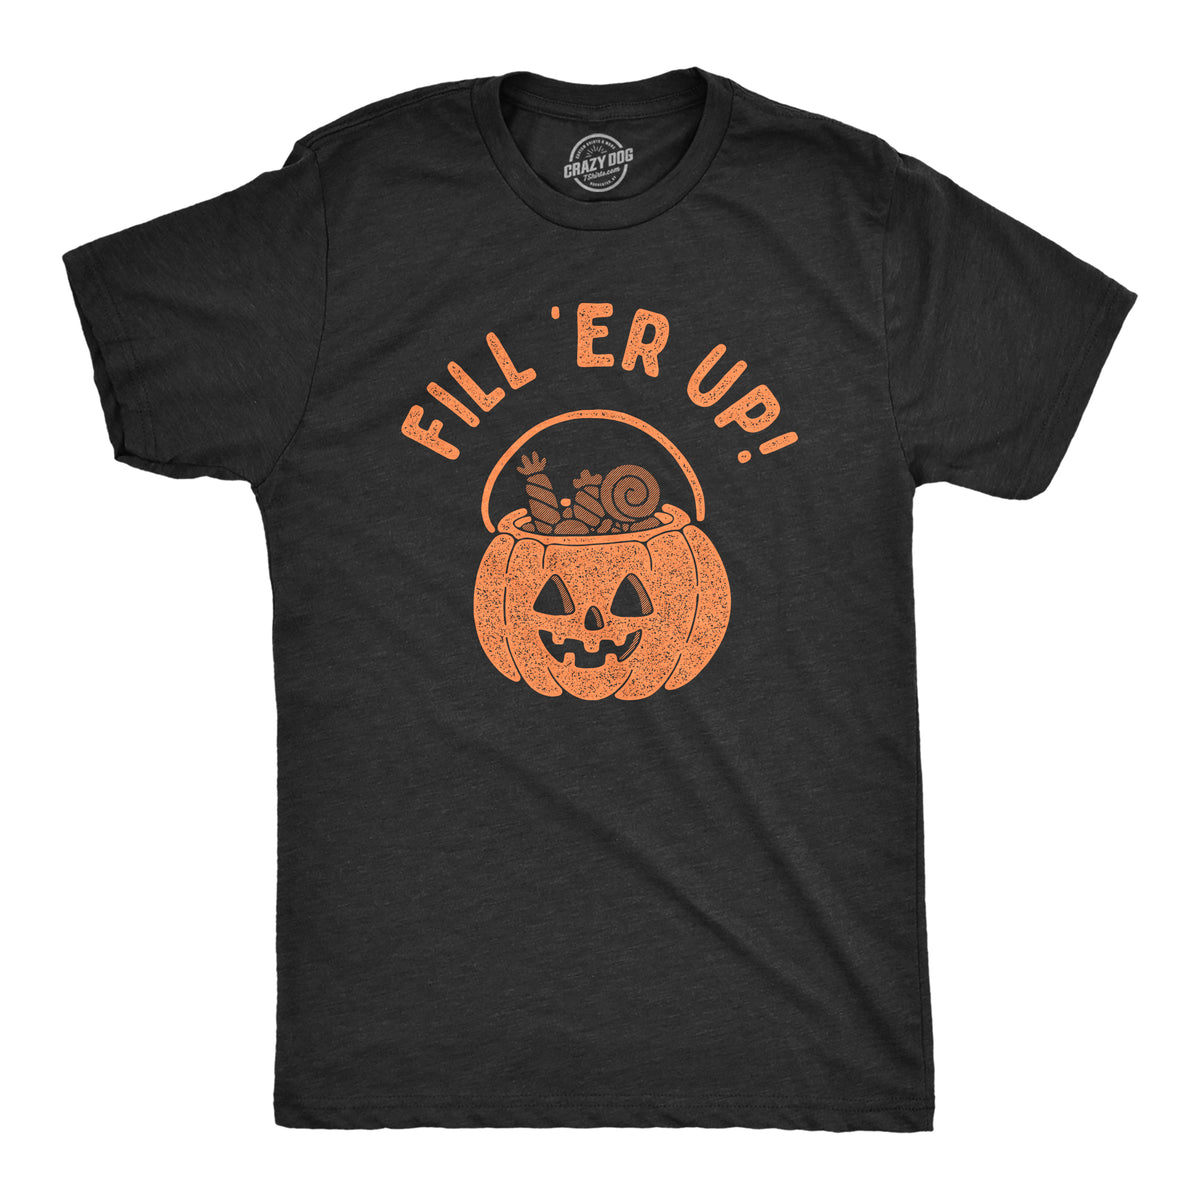 Funny Heather Black - FILL Fill Er Up Mens T Shirt Nerdy Halloween sarcastic Tee